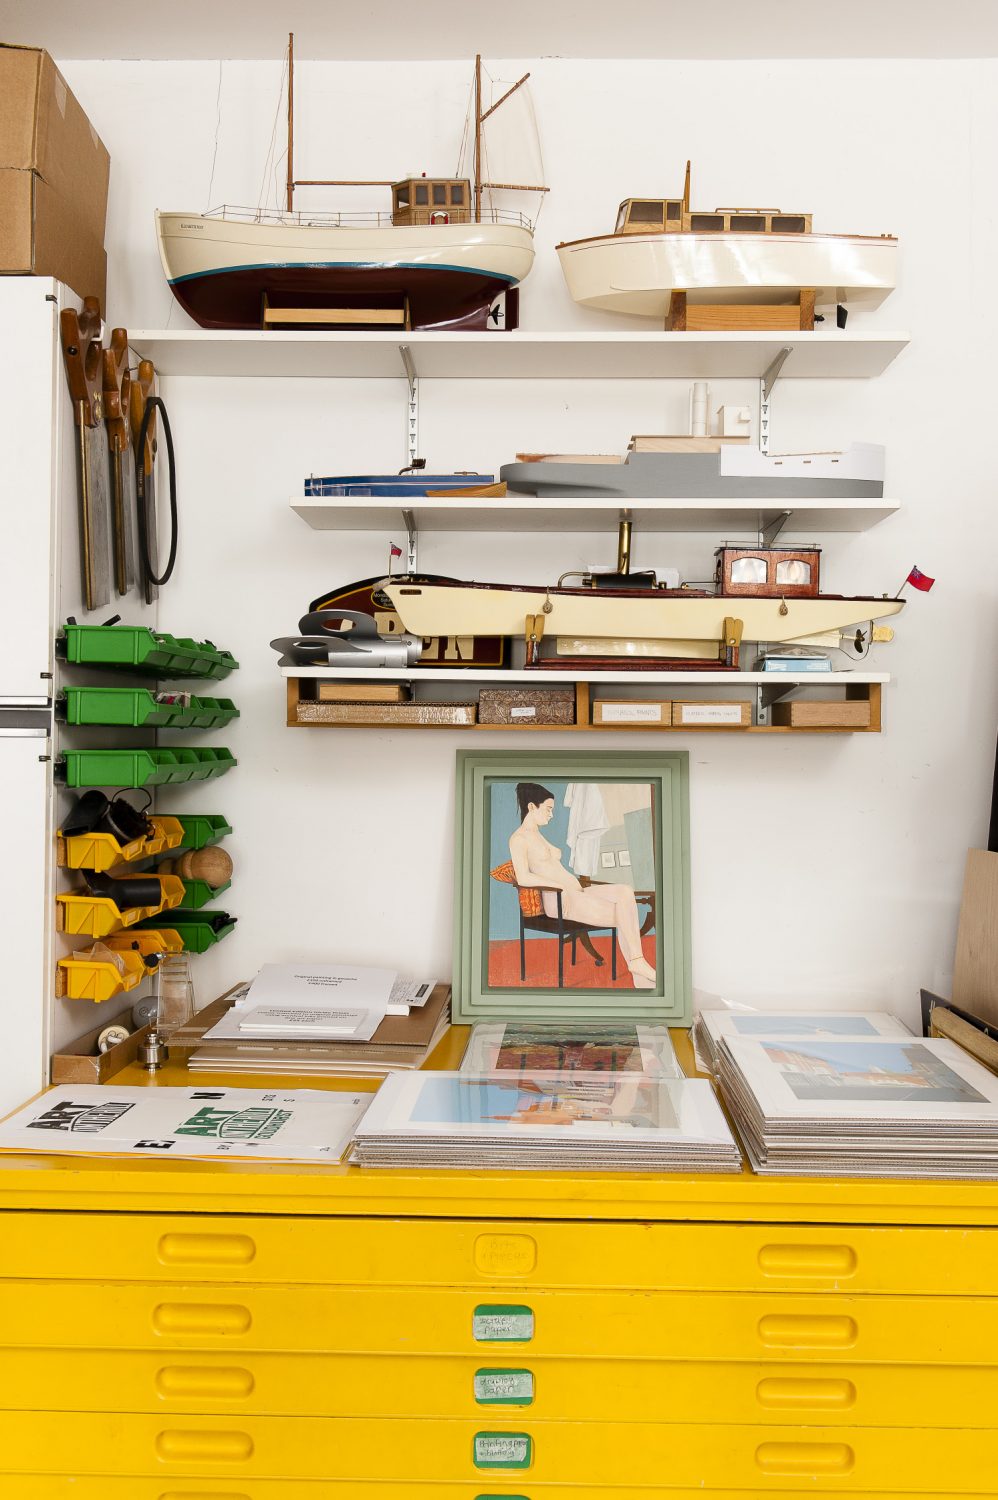 The studio is home to more of Dave's boats and a wonderful bright yellow plan chest